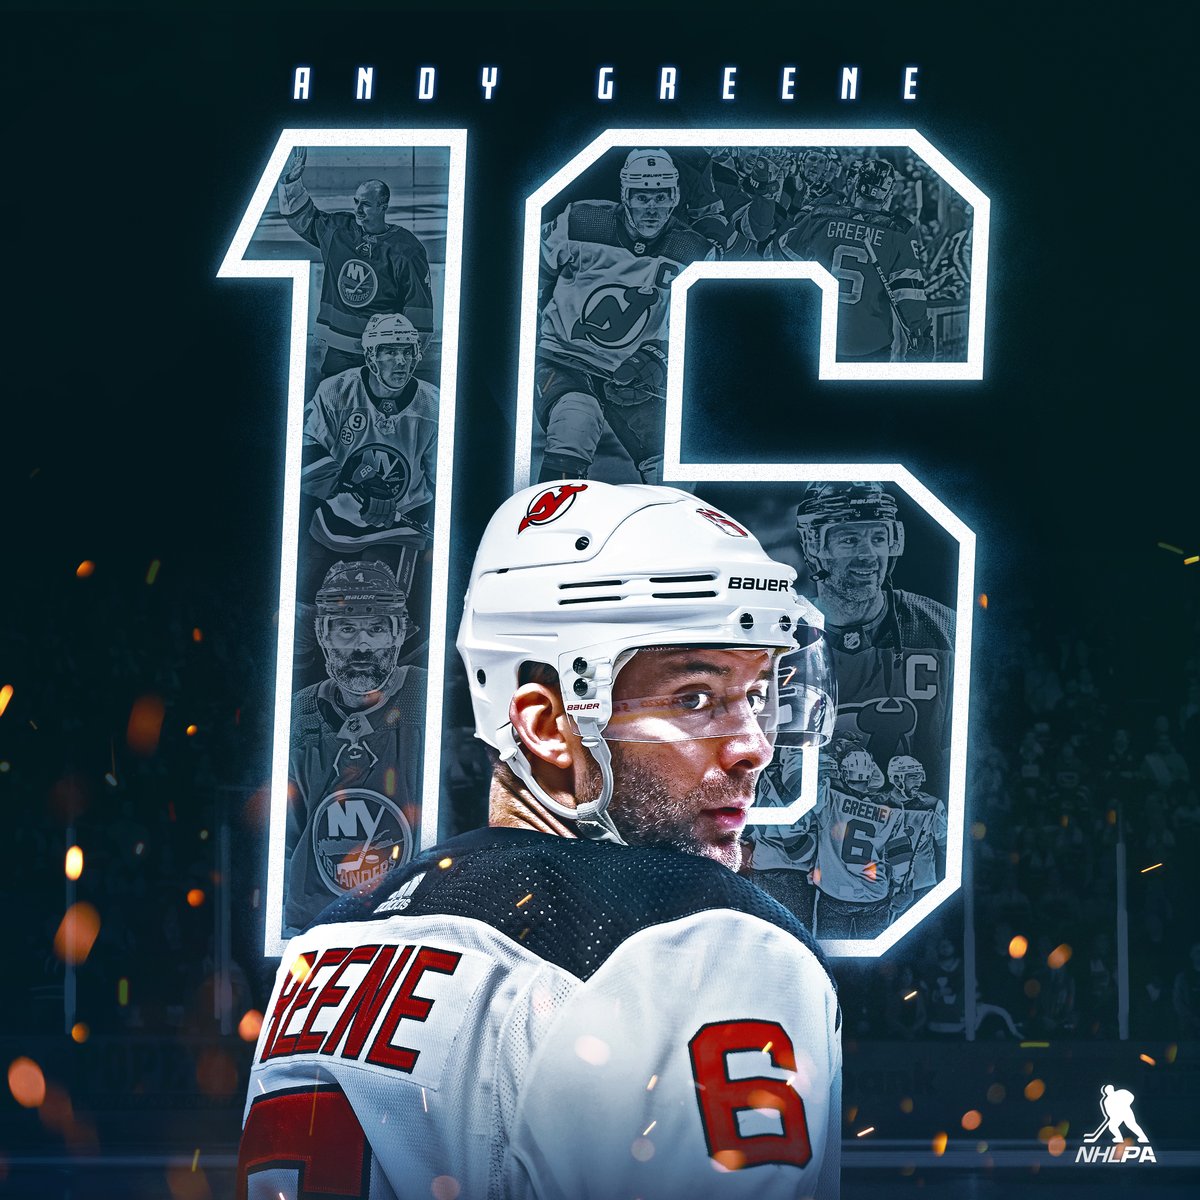 Leading from the blueline for 1,057 NHL regular-season games, wishing Andy Greene all the best in his retirement after playing 16 seasons with @NJDevils and @NYIslanders.